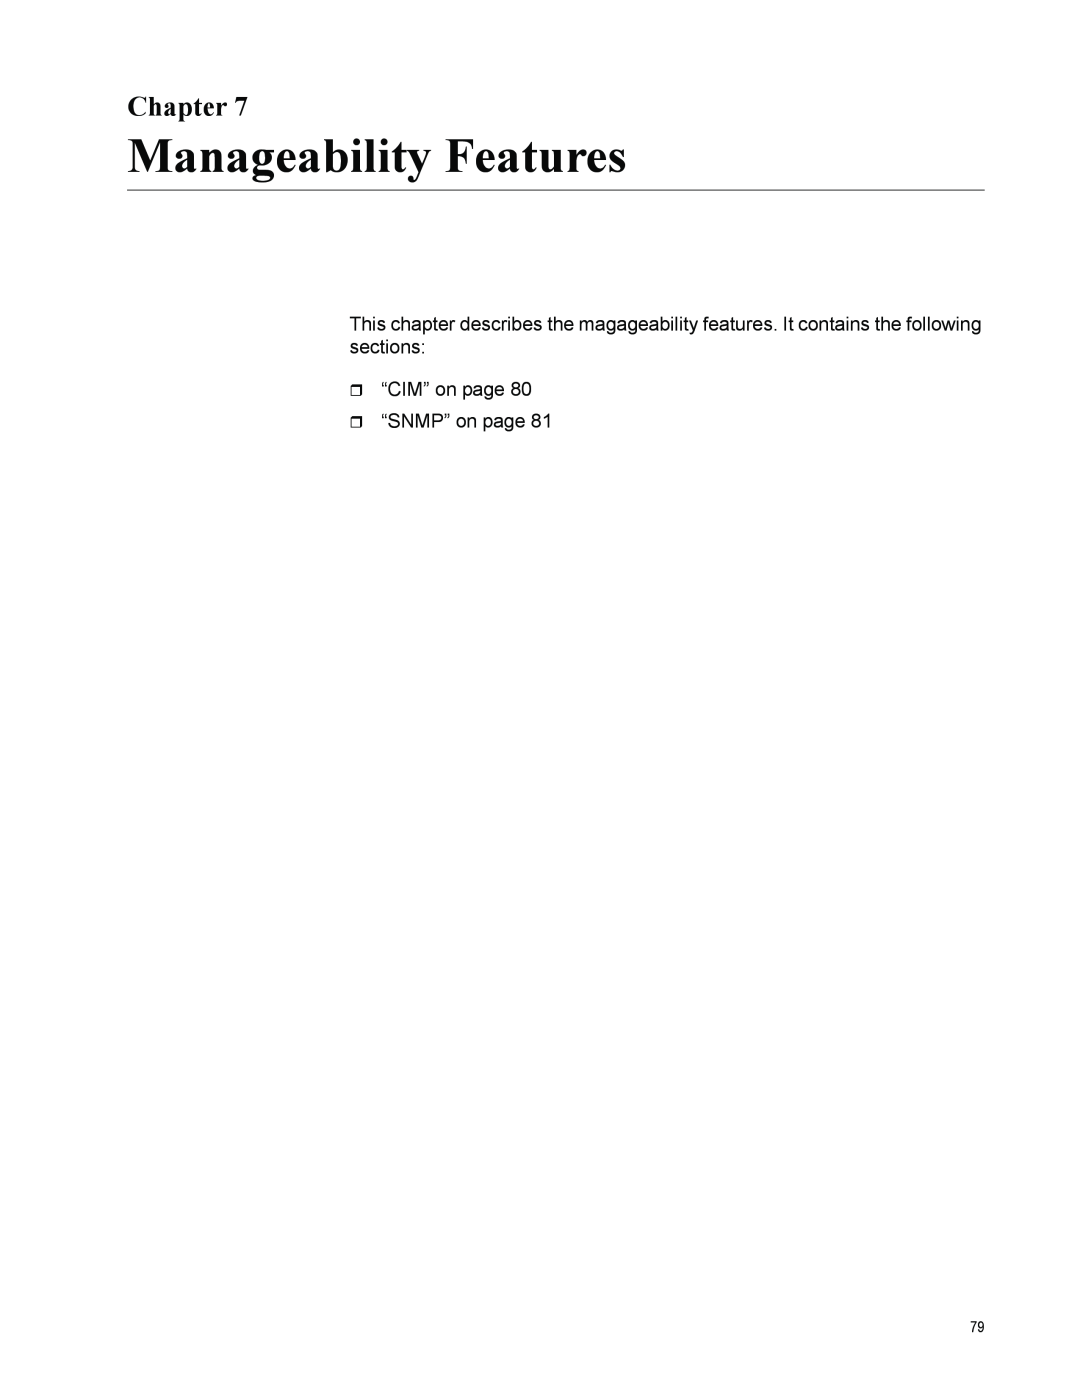 Allied Telesis AT-2931SX manual Manageability Features, Chapter, ˆ “CIM” on page ˆ “SNMP” on page 